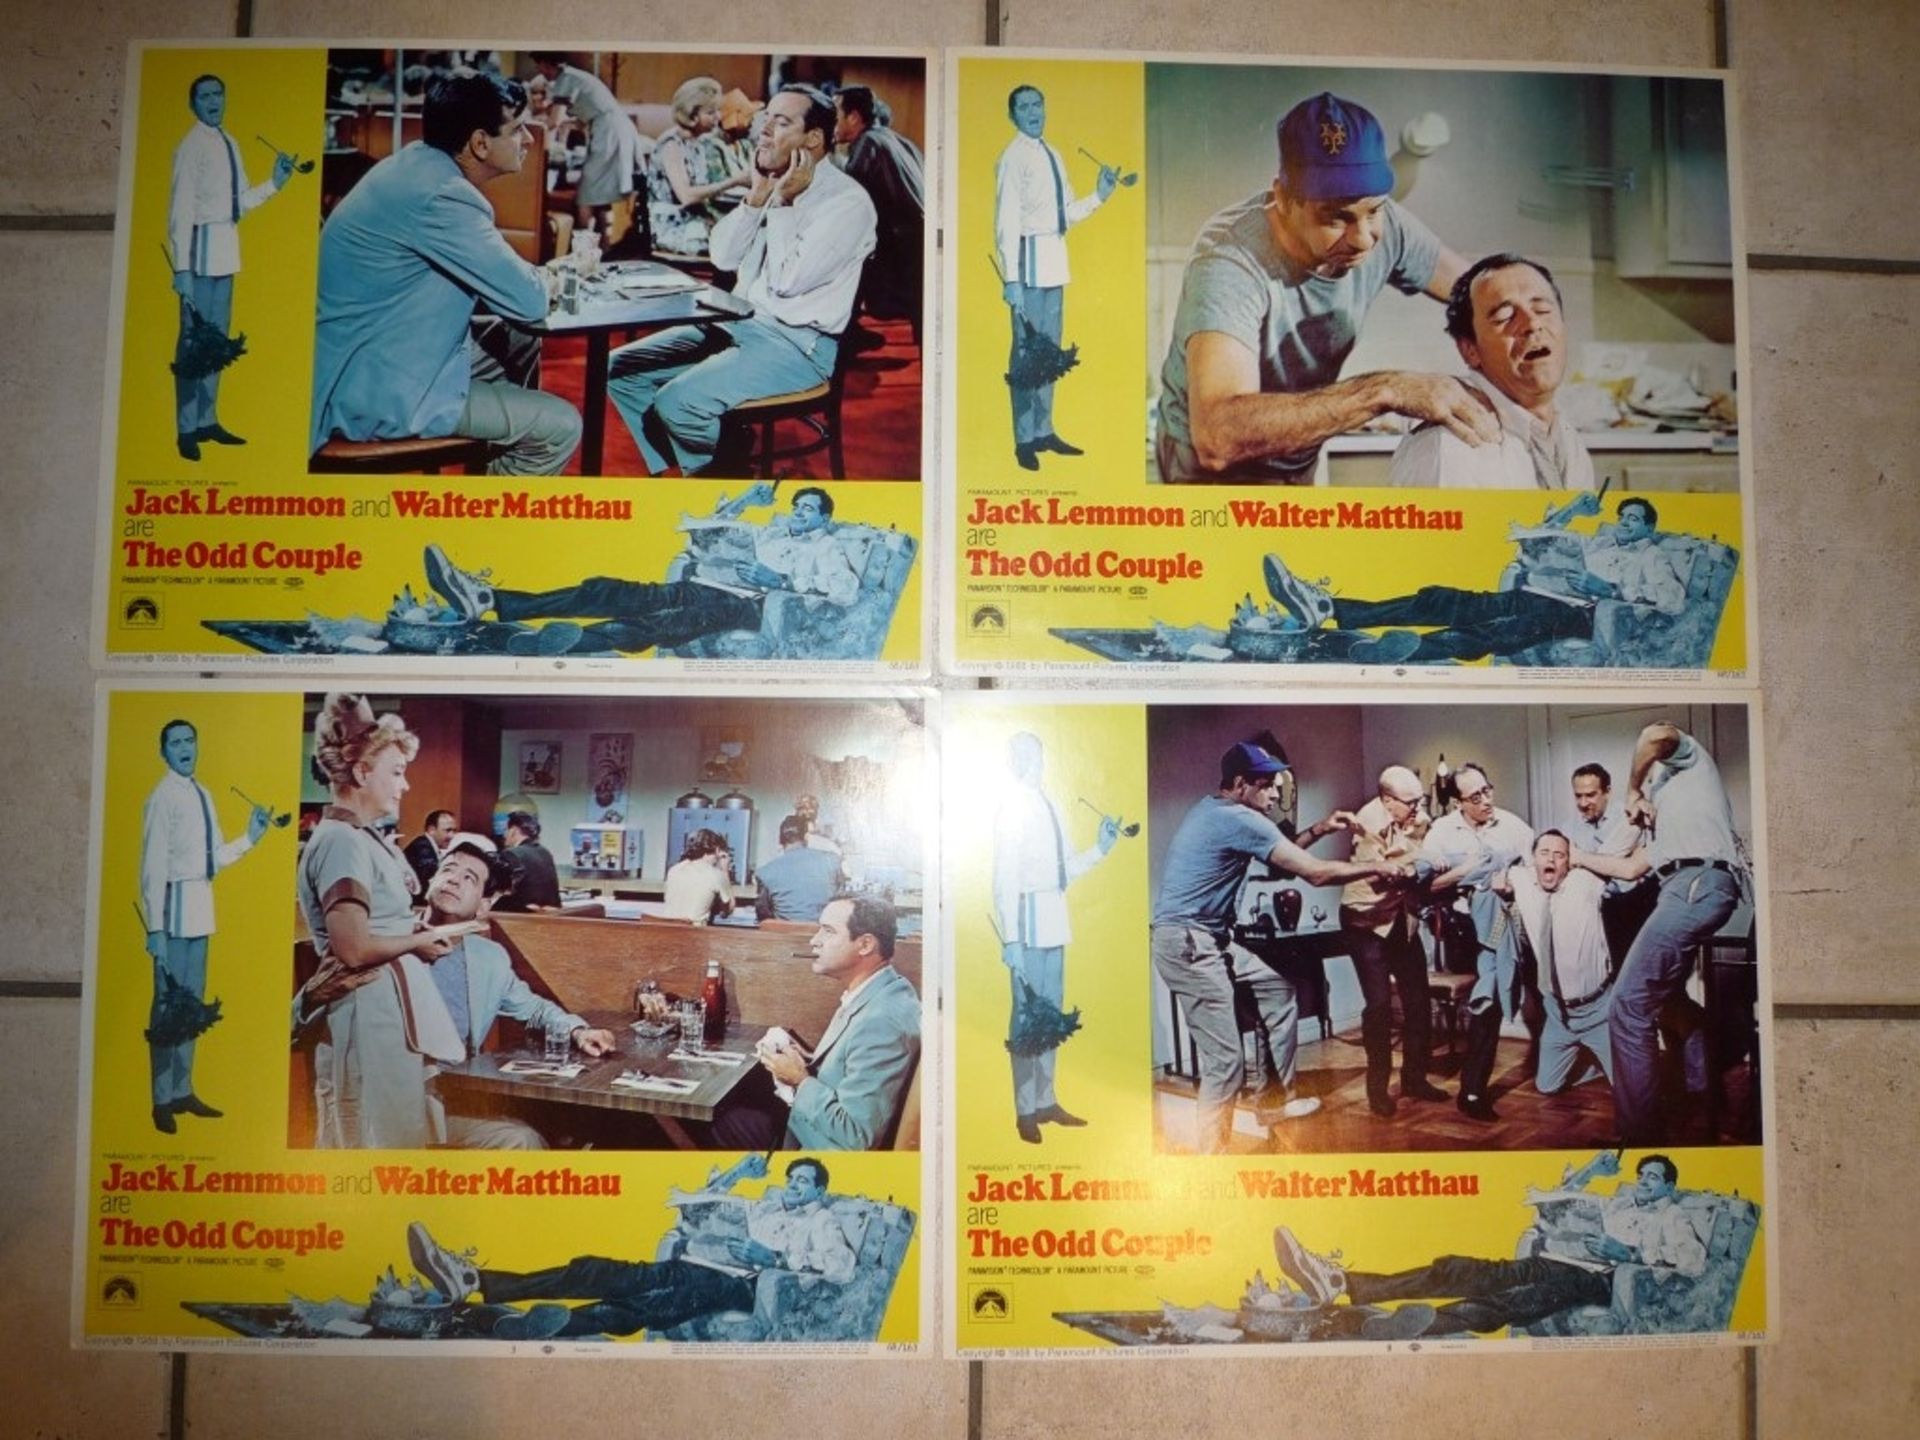 The Odd Couple lobby cards - Image 2 of 2